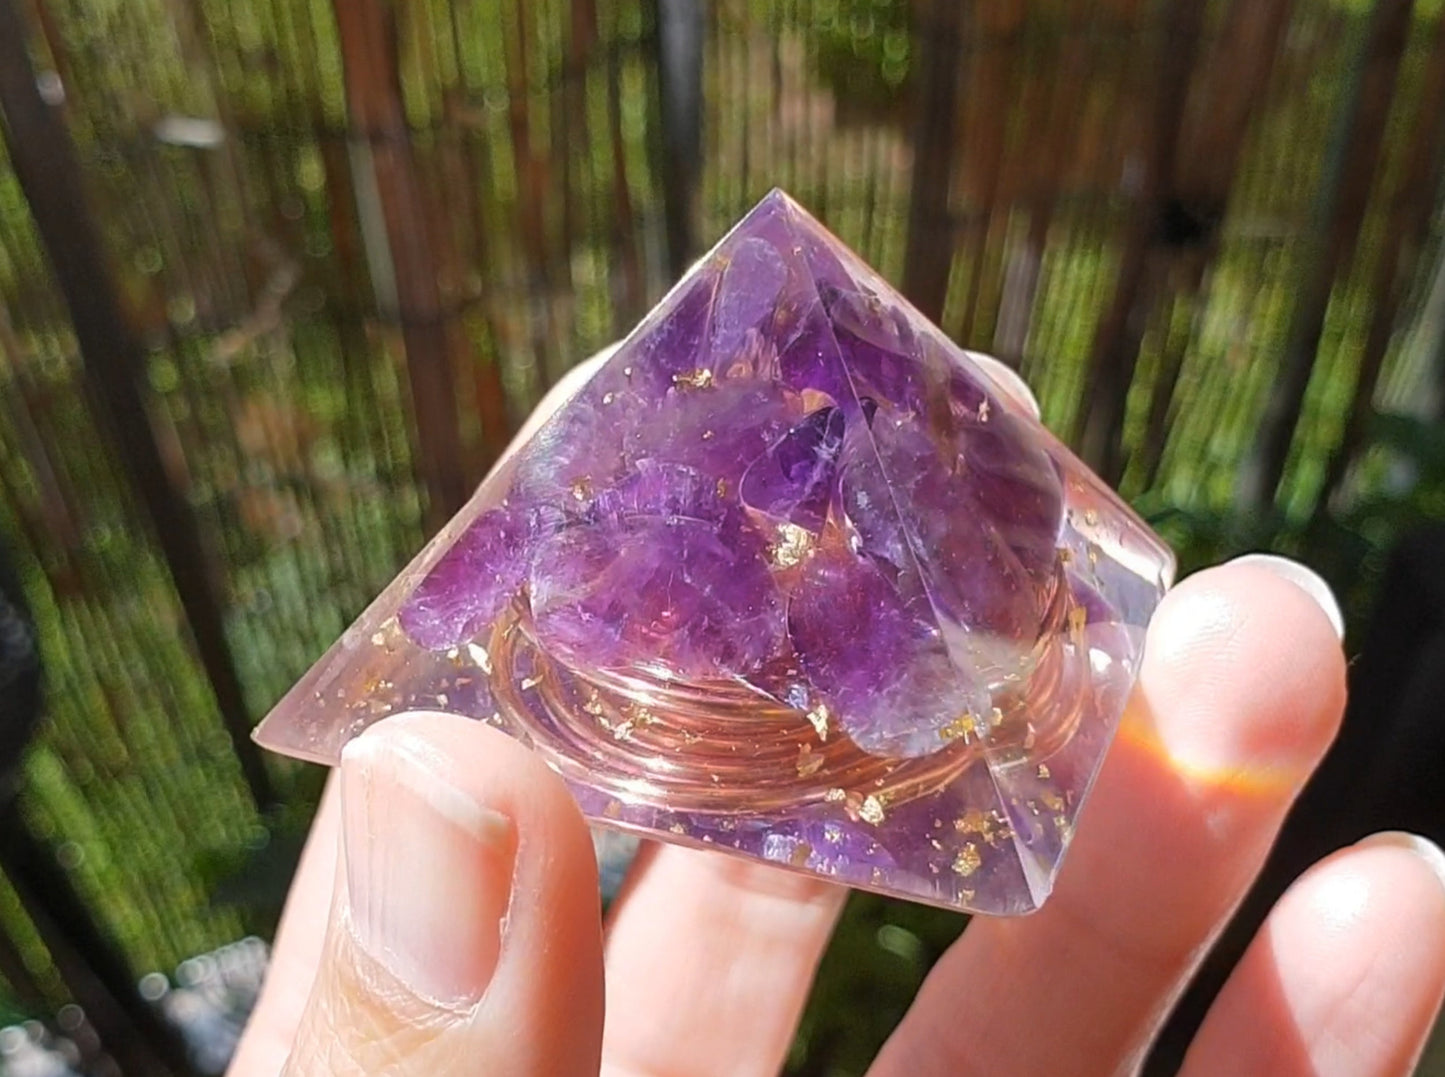 Orgonite Pyramid, Amethyst - peace, harmony, protection, programmed and activated amulet, charm